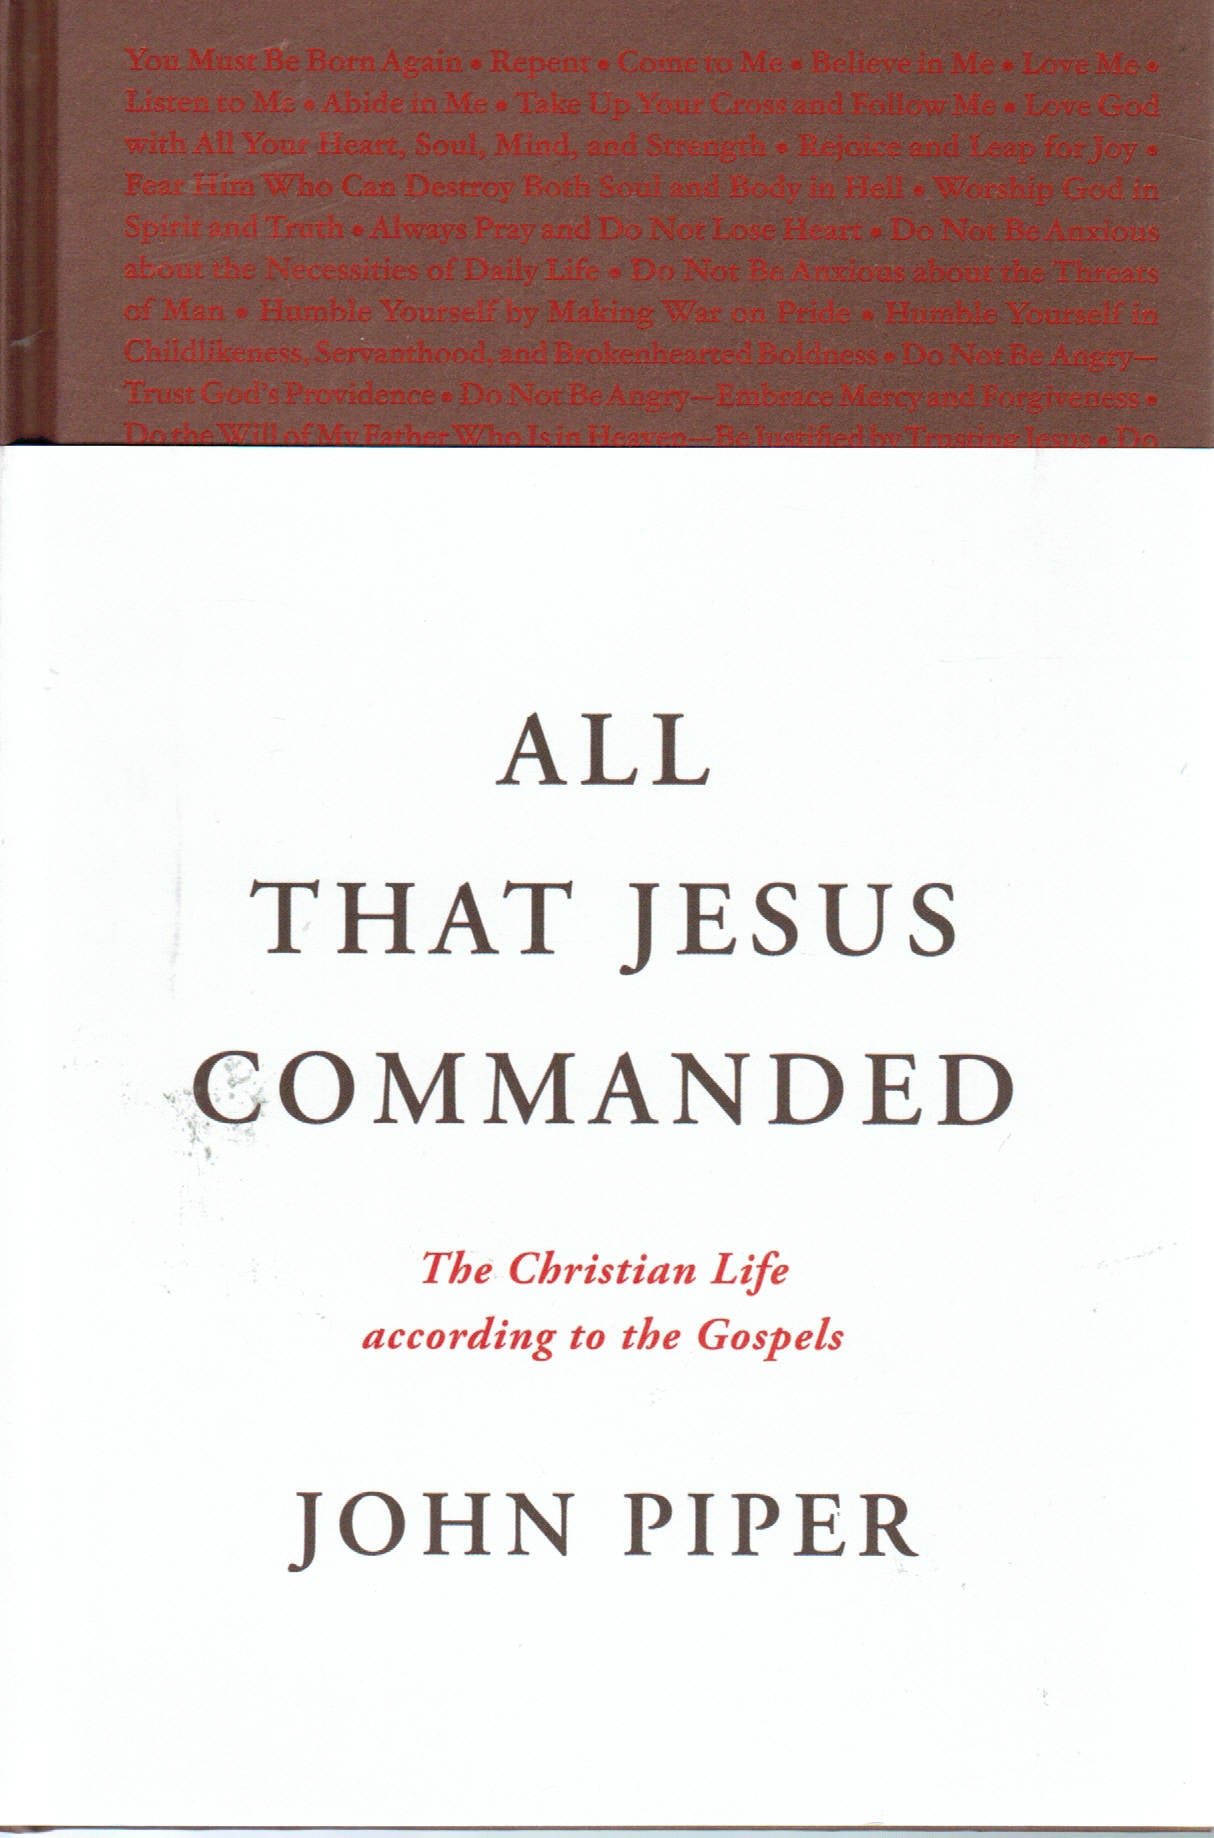 All That Jesus Commanded: The Christian Life according to the Gospels